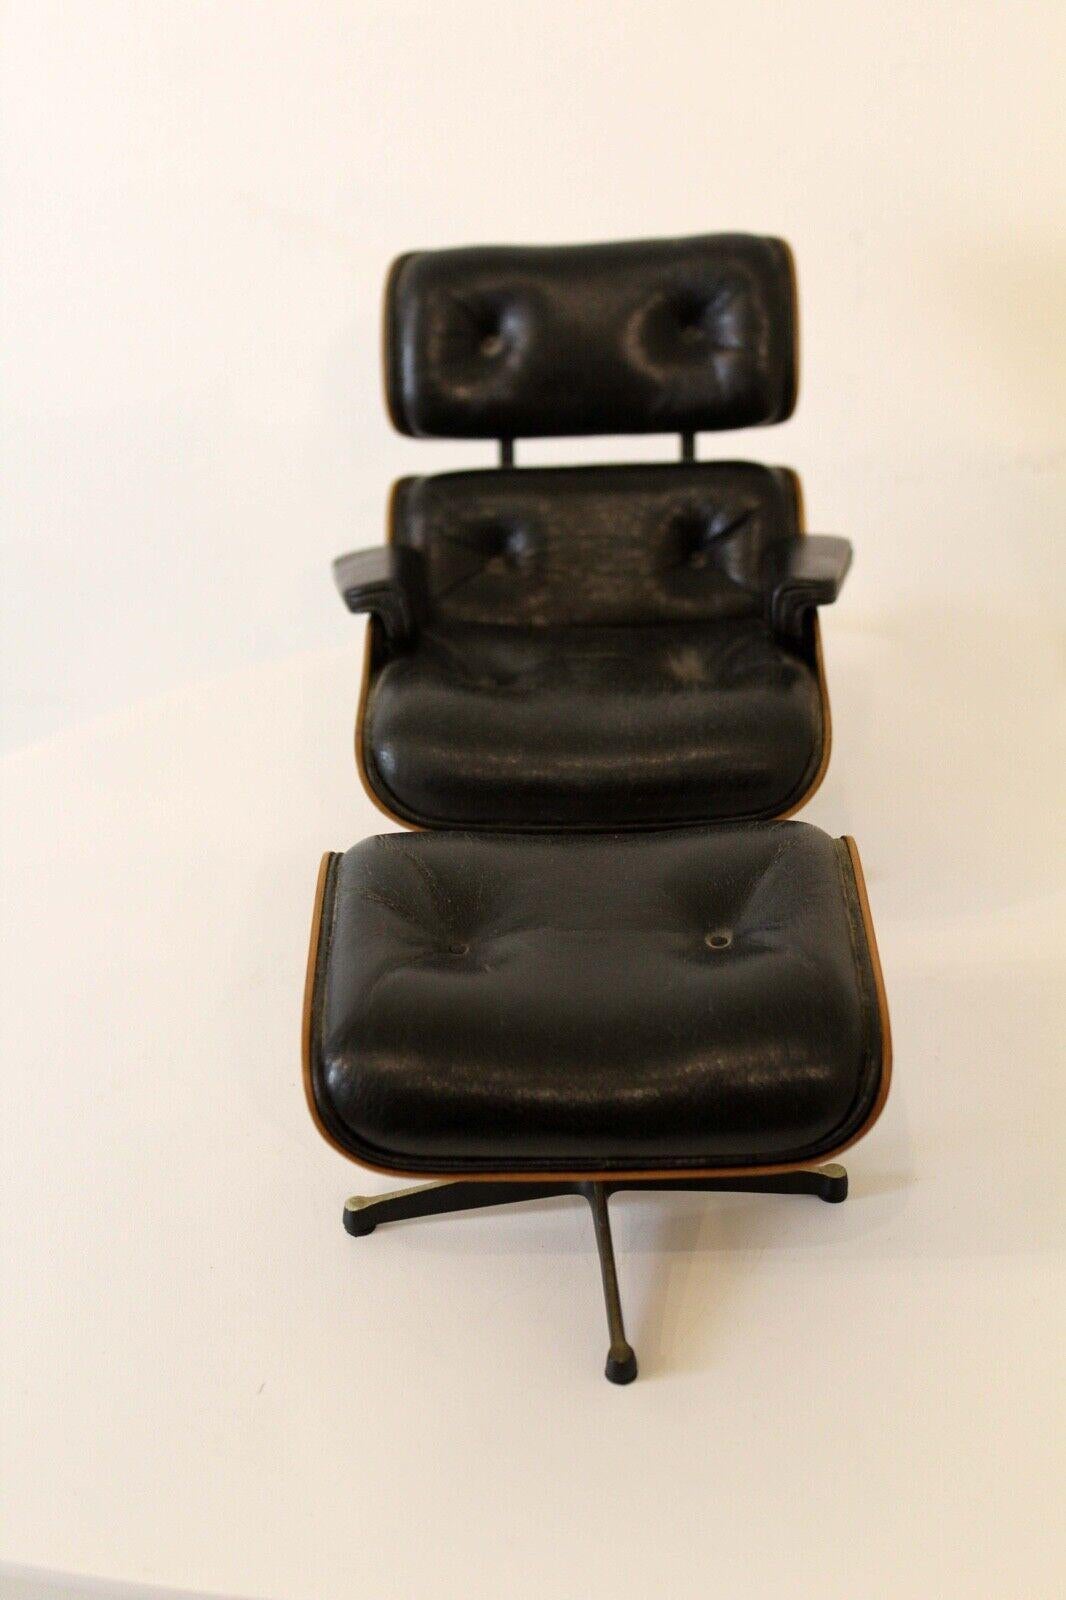 For your consideration is this cute and classy miniature of the Iconic Charles & Ray Eames for Herman Miller lounge chair and ottoman. Dimensions: Chair: 5w x 6.25d x 5h Ottoman: 4.5w x 3.5d x 2.75h.
 